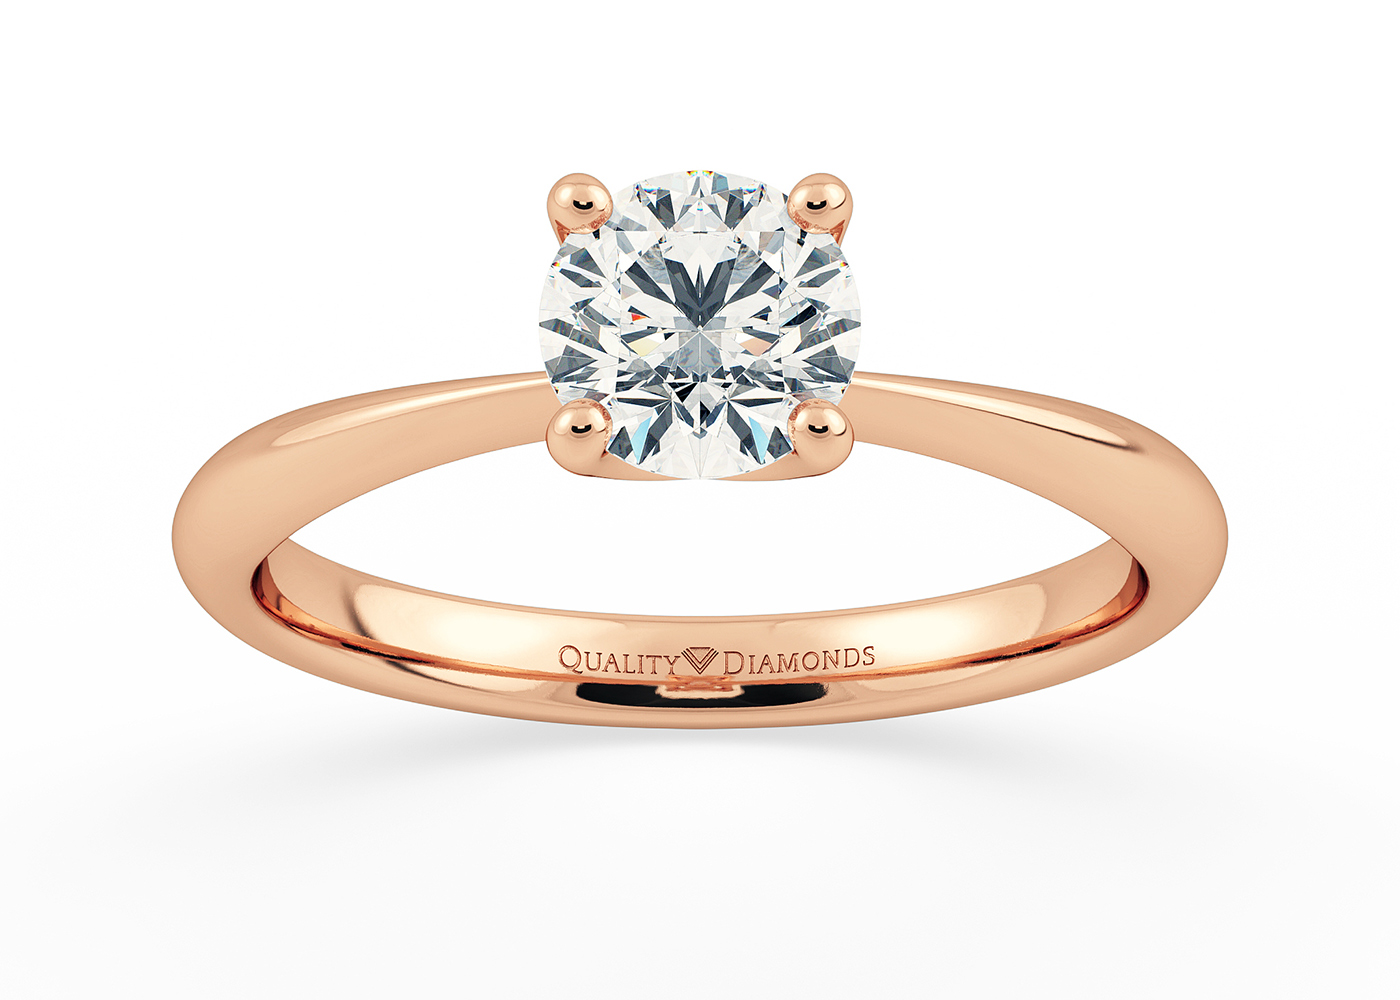 One Carat Round Brilliant Solitaire Diamond Engagement Ring in 18K Rose Gold